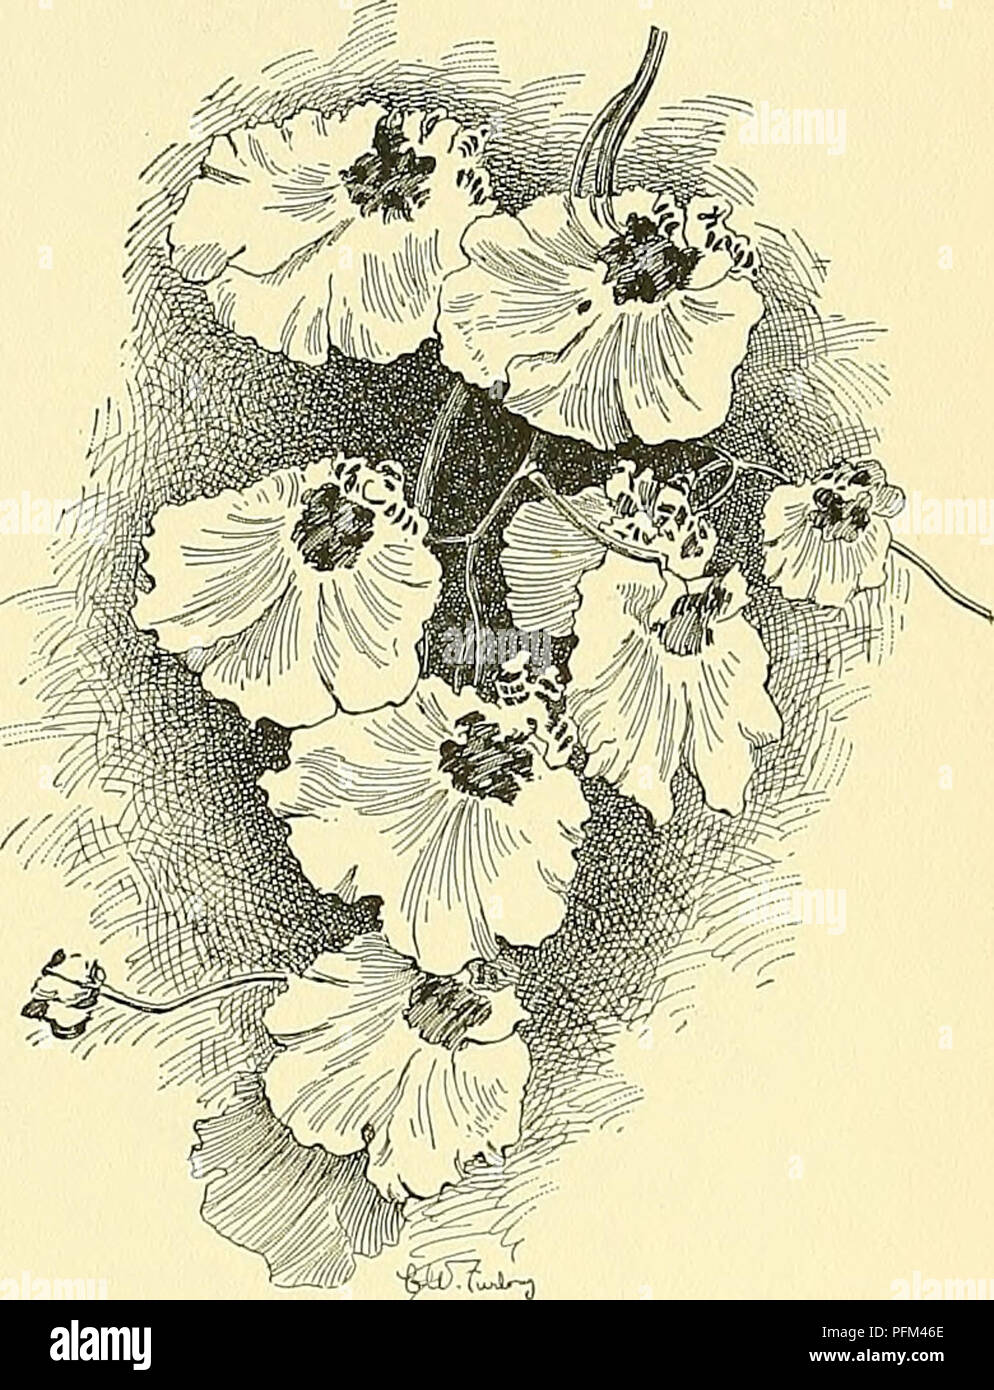 . Cyclopedia of American horticulture, comprising suggestions for cultivation of horticultural plants, descriptions of the species of fruits, vegetables, flowers, and ornamental plants sold in the United States and Canada, together with geographical and biographical sketches. Gardening. ONCIDIUM ONCIDIDM 1131 6. Marshalliauum, Eeichb. f. Pseudobulbs ovoid, 2-4 in. long: ivs. narrowly oblong, G-8 in. long: fls. nu- merous, 2% in. across, borne on a stout panicle 1-2 ft. high; the upper sepals oblong-apiculate, the lateral ones united, yellow, with purplish bands; petals much larger, fiddle-shap Stock Photo